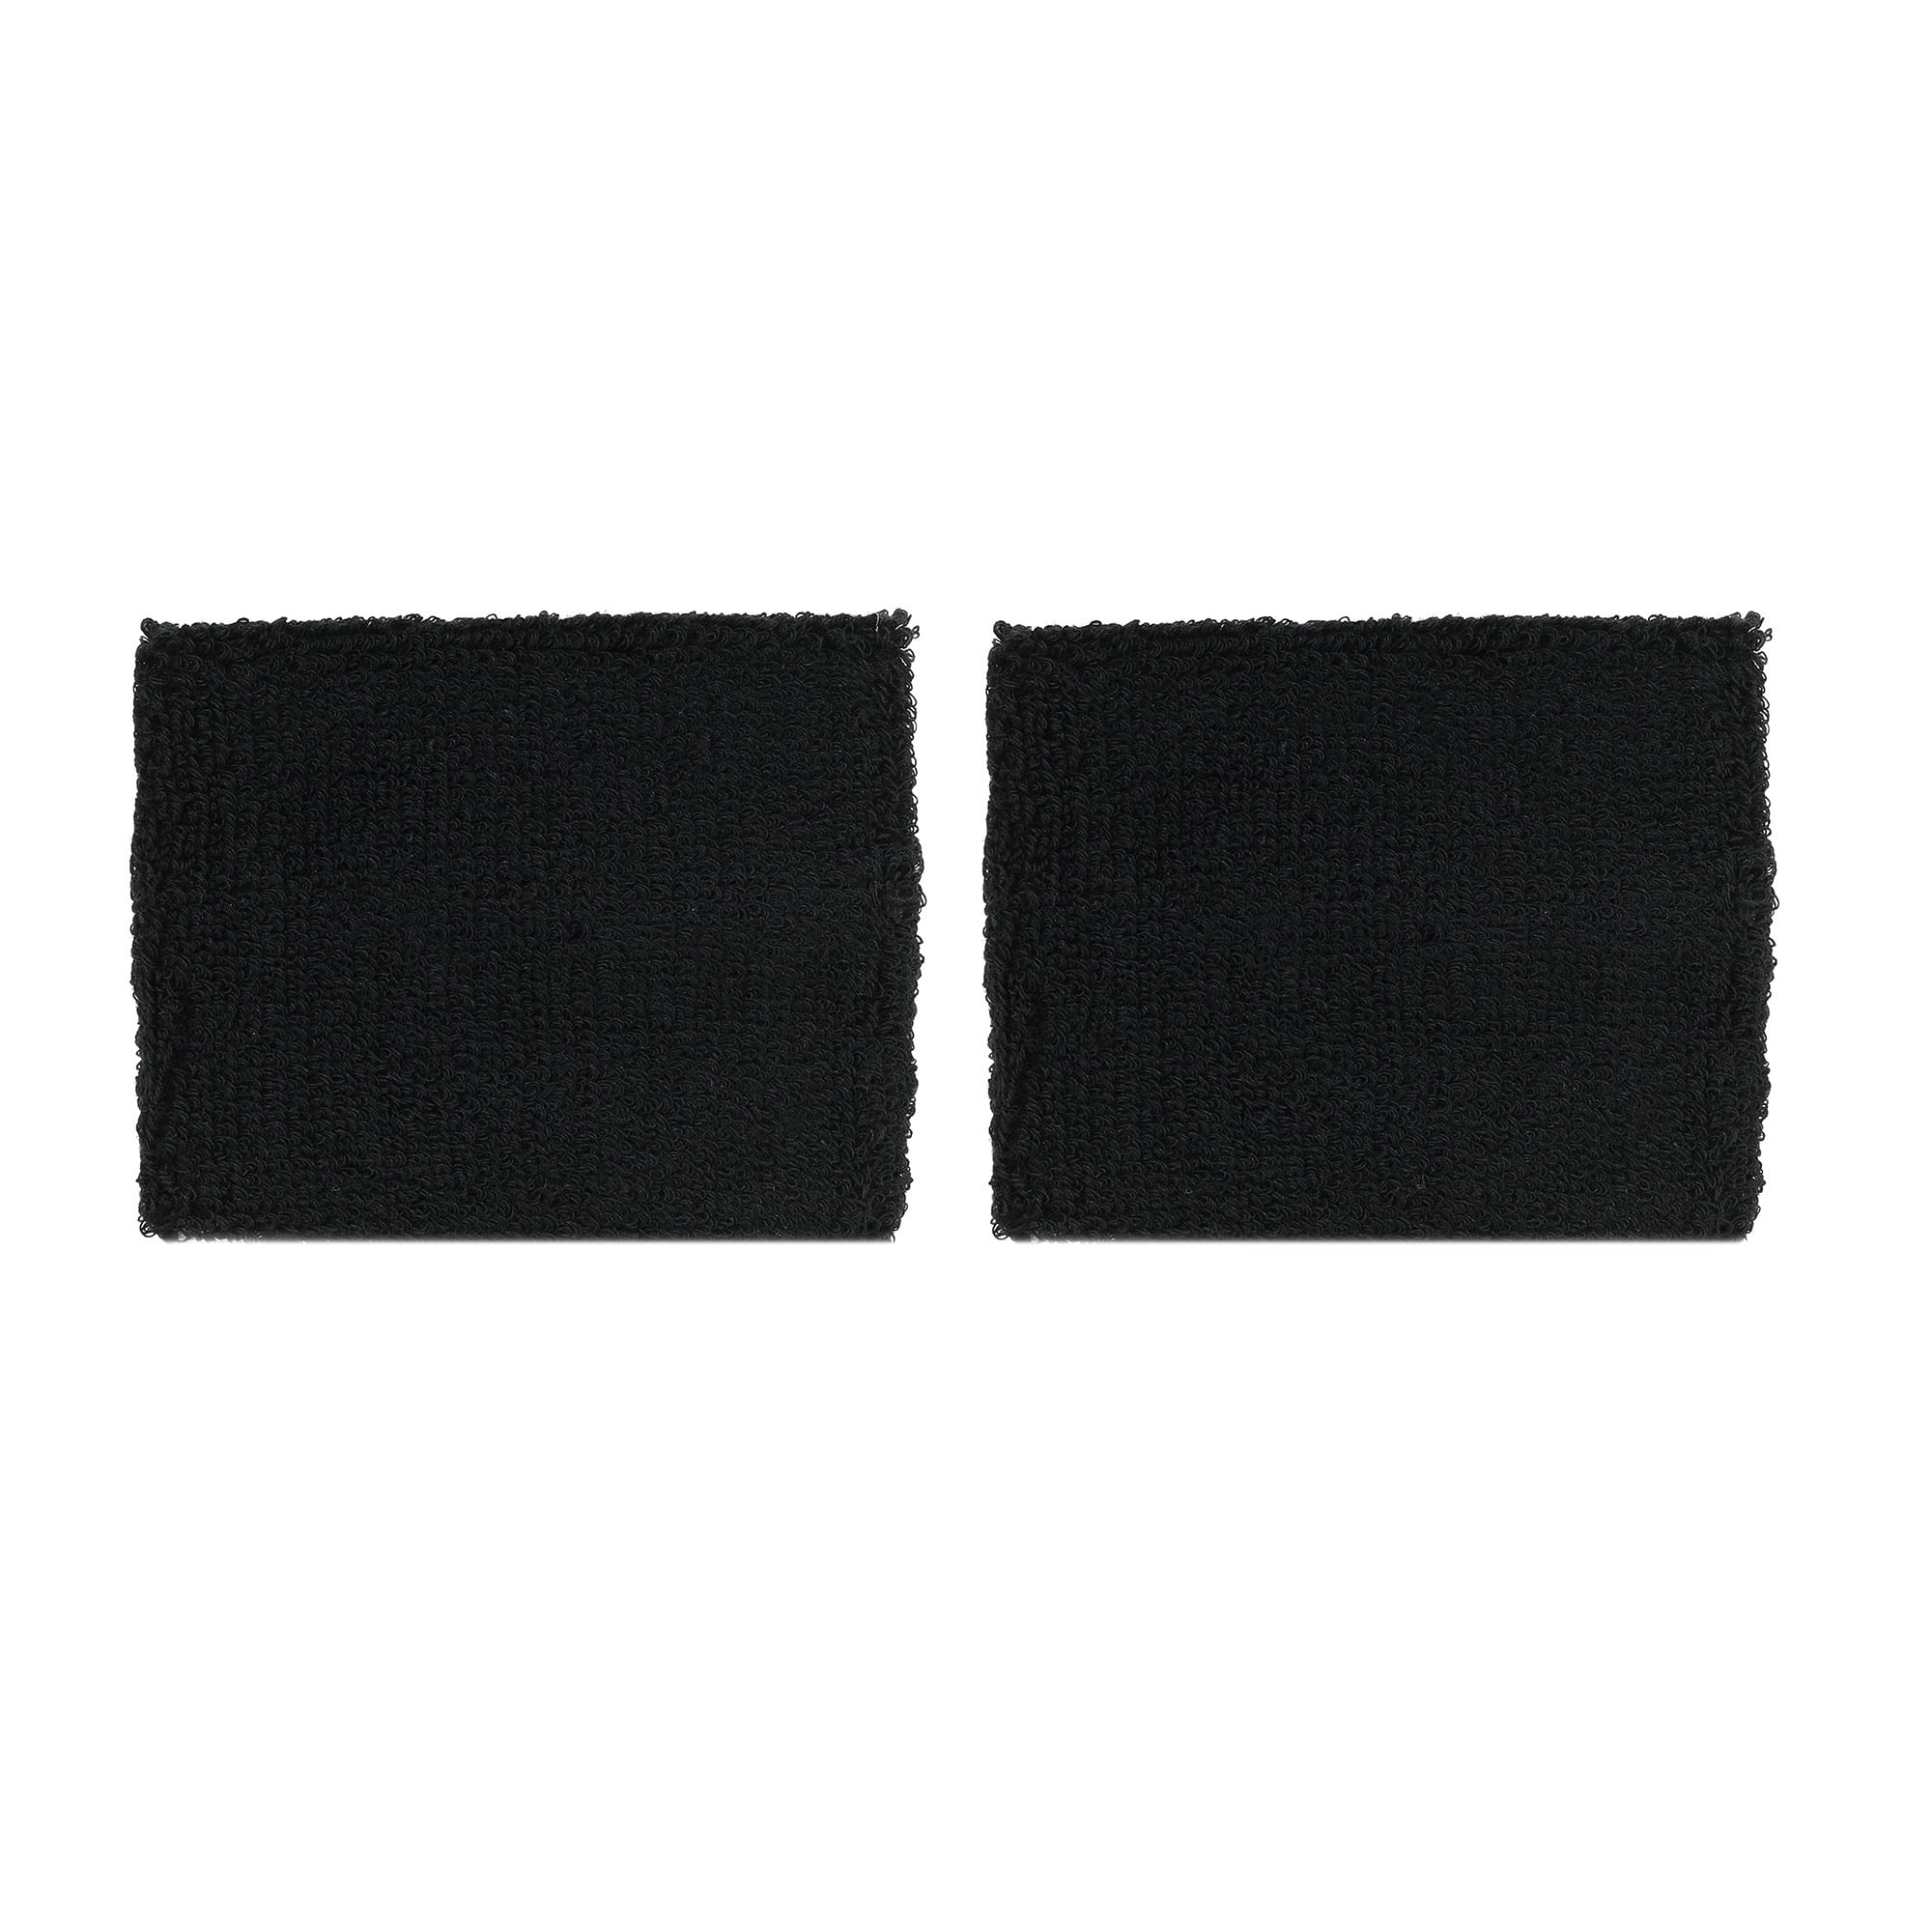 Athletic Works Terrycloth Wristbands, Black, 2 Count